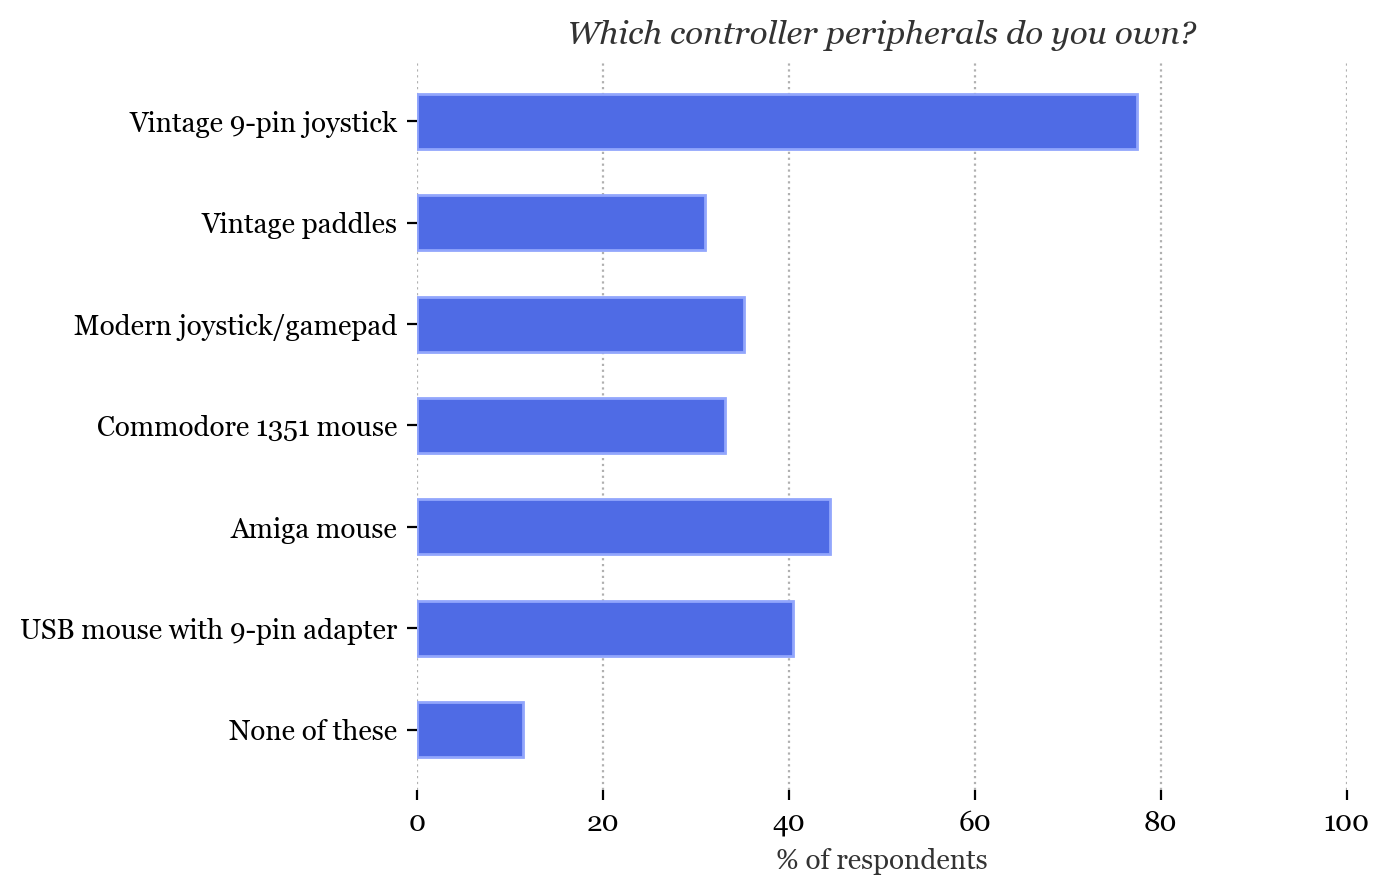 Which controller peripherals do you own?